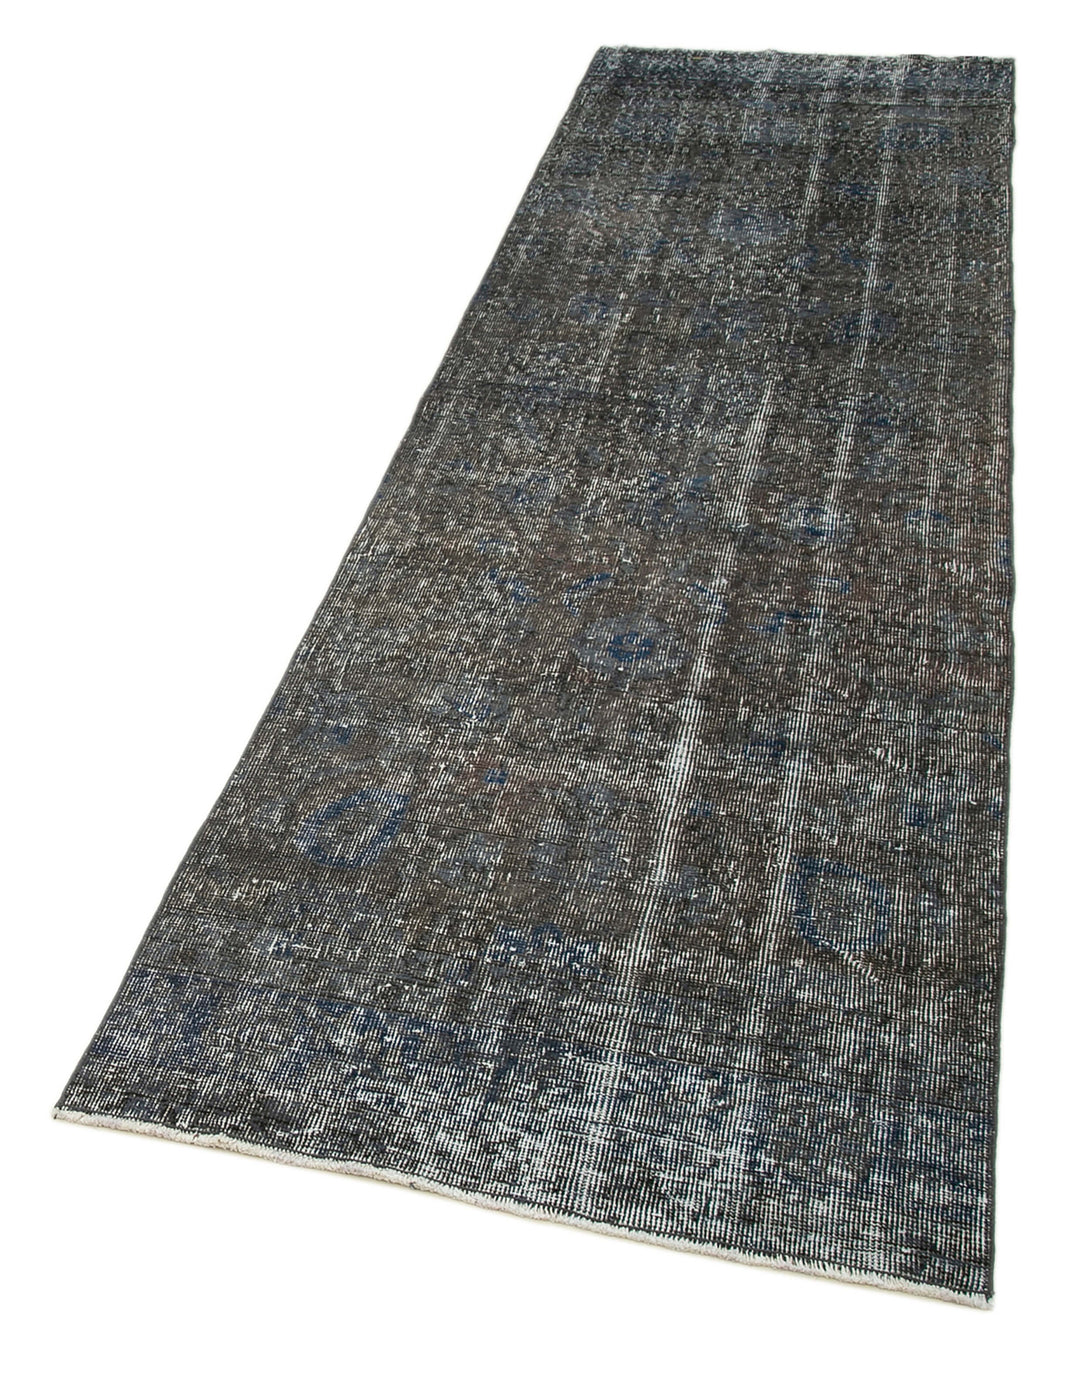 Handmade Overdyed Runner > Design# OL-AC-29746 > Size: 2'-7" x 9'-5", Carpet Culture Rugs, Handmade Rugs, NYC Rugs, New Rugs, Shop Rugs, Rug Store, Outlet Rugs, SoHo Rugs, Rugs in USA